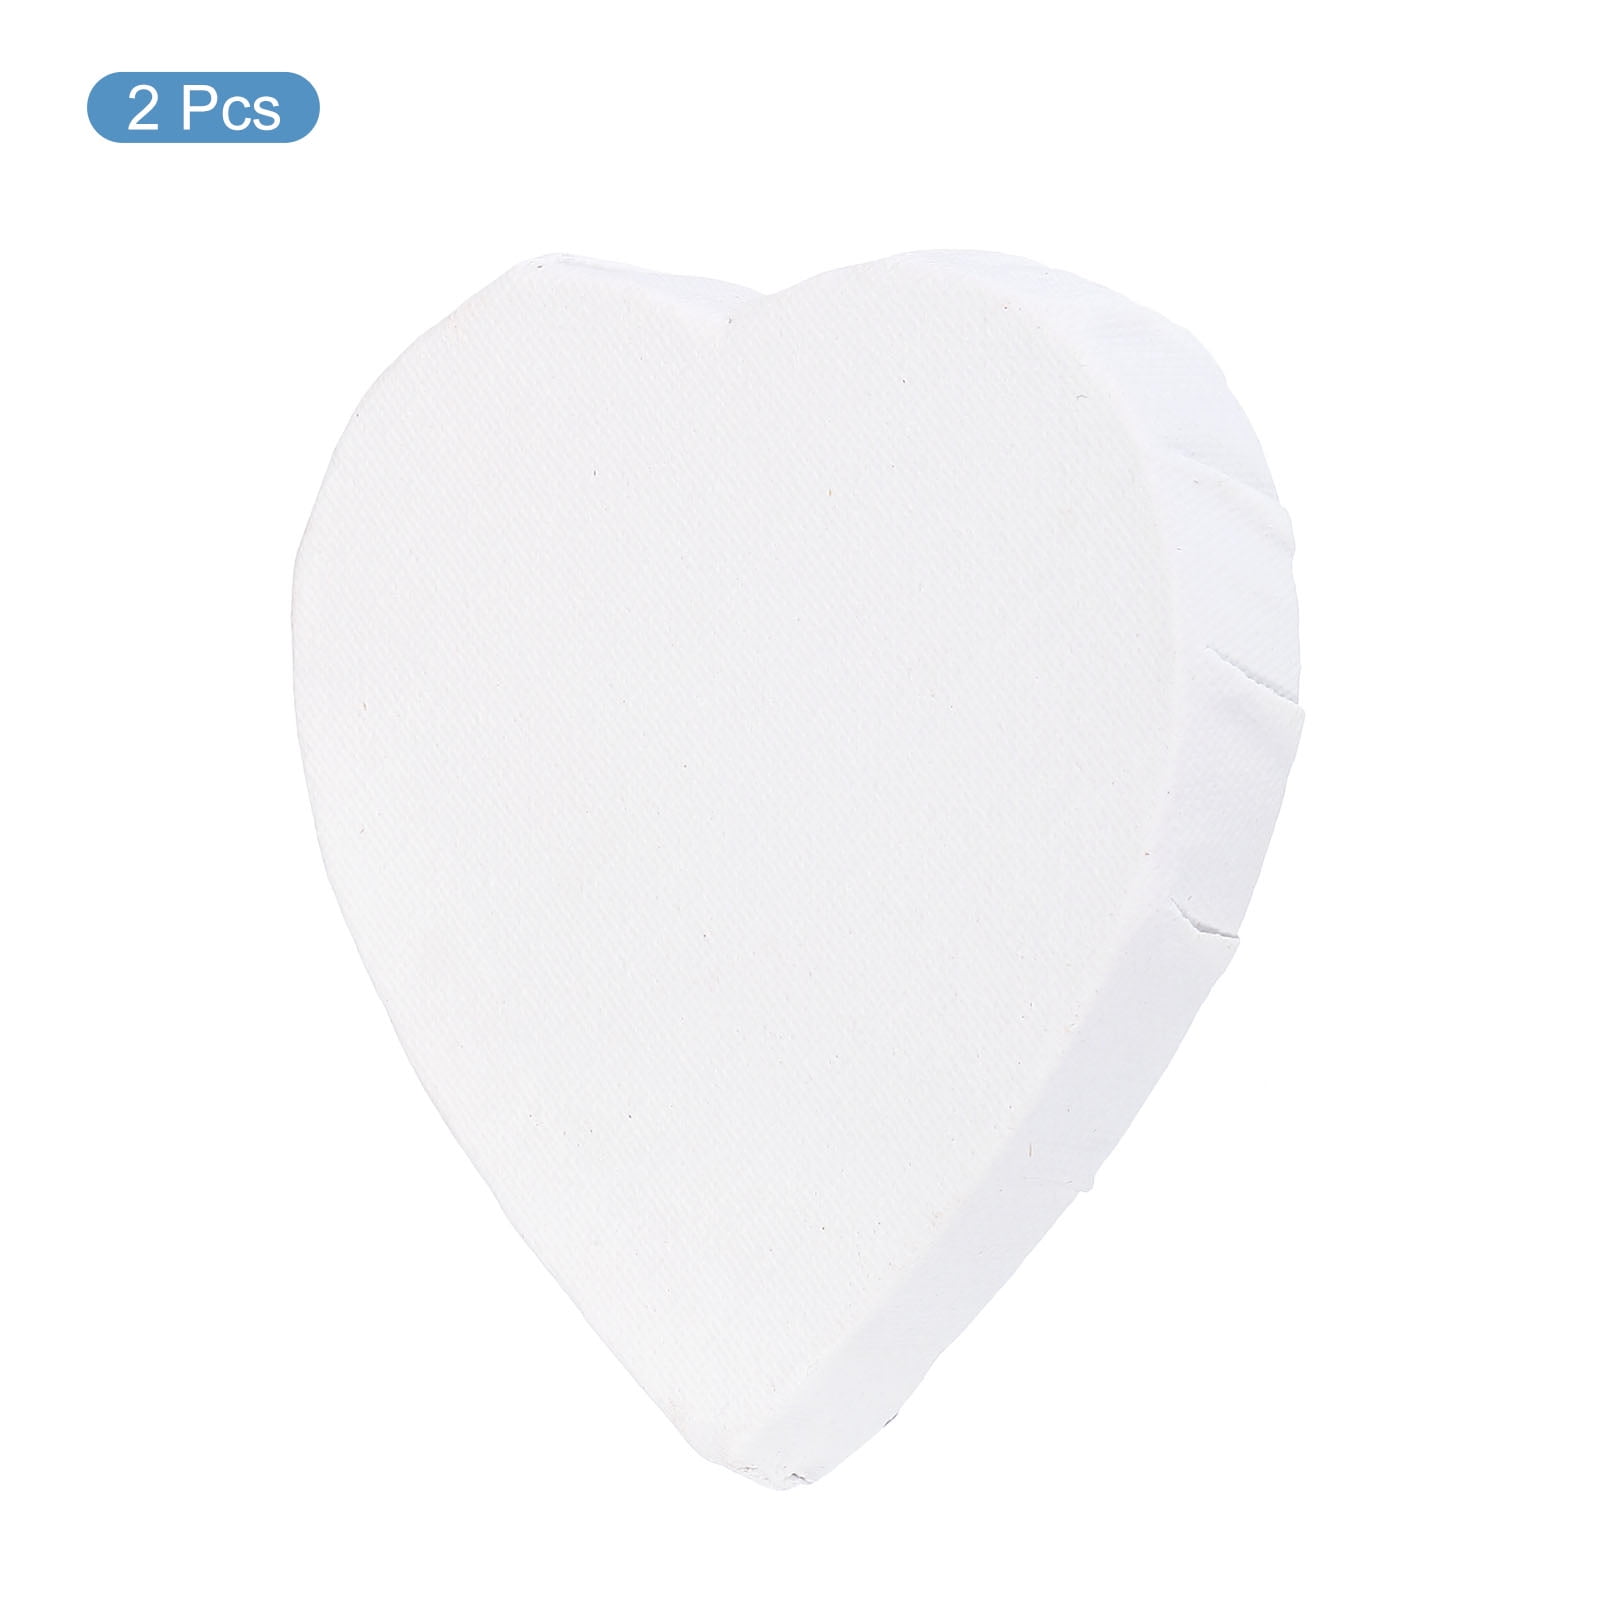 Heart Shaped White Blank Painting Canvas Wooden Framed Artist Pre-Stretched Canvas Panel Plain Small Canvas Crafts Boards for Students Artists